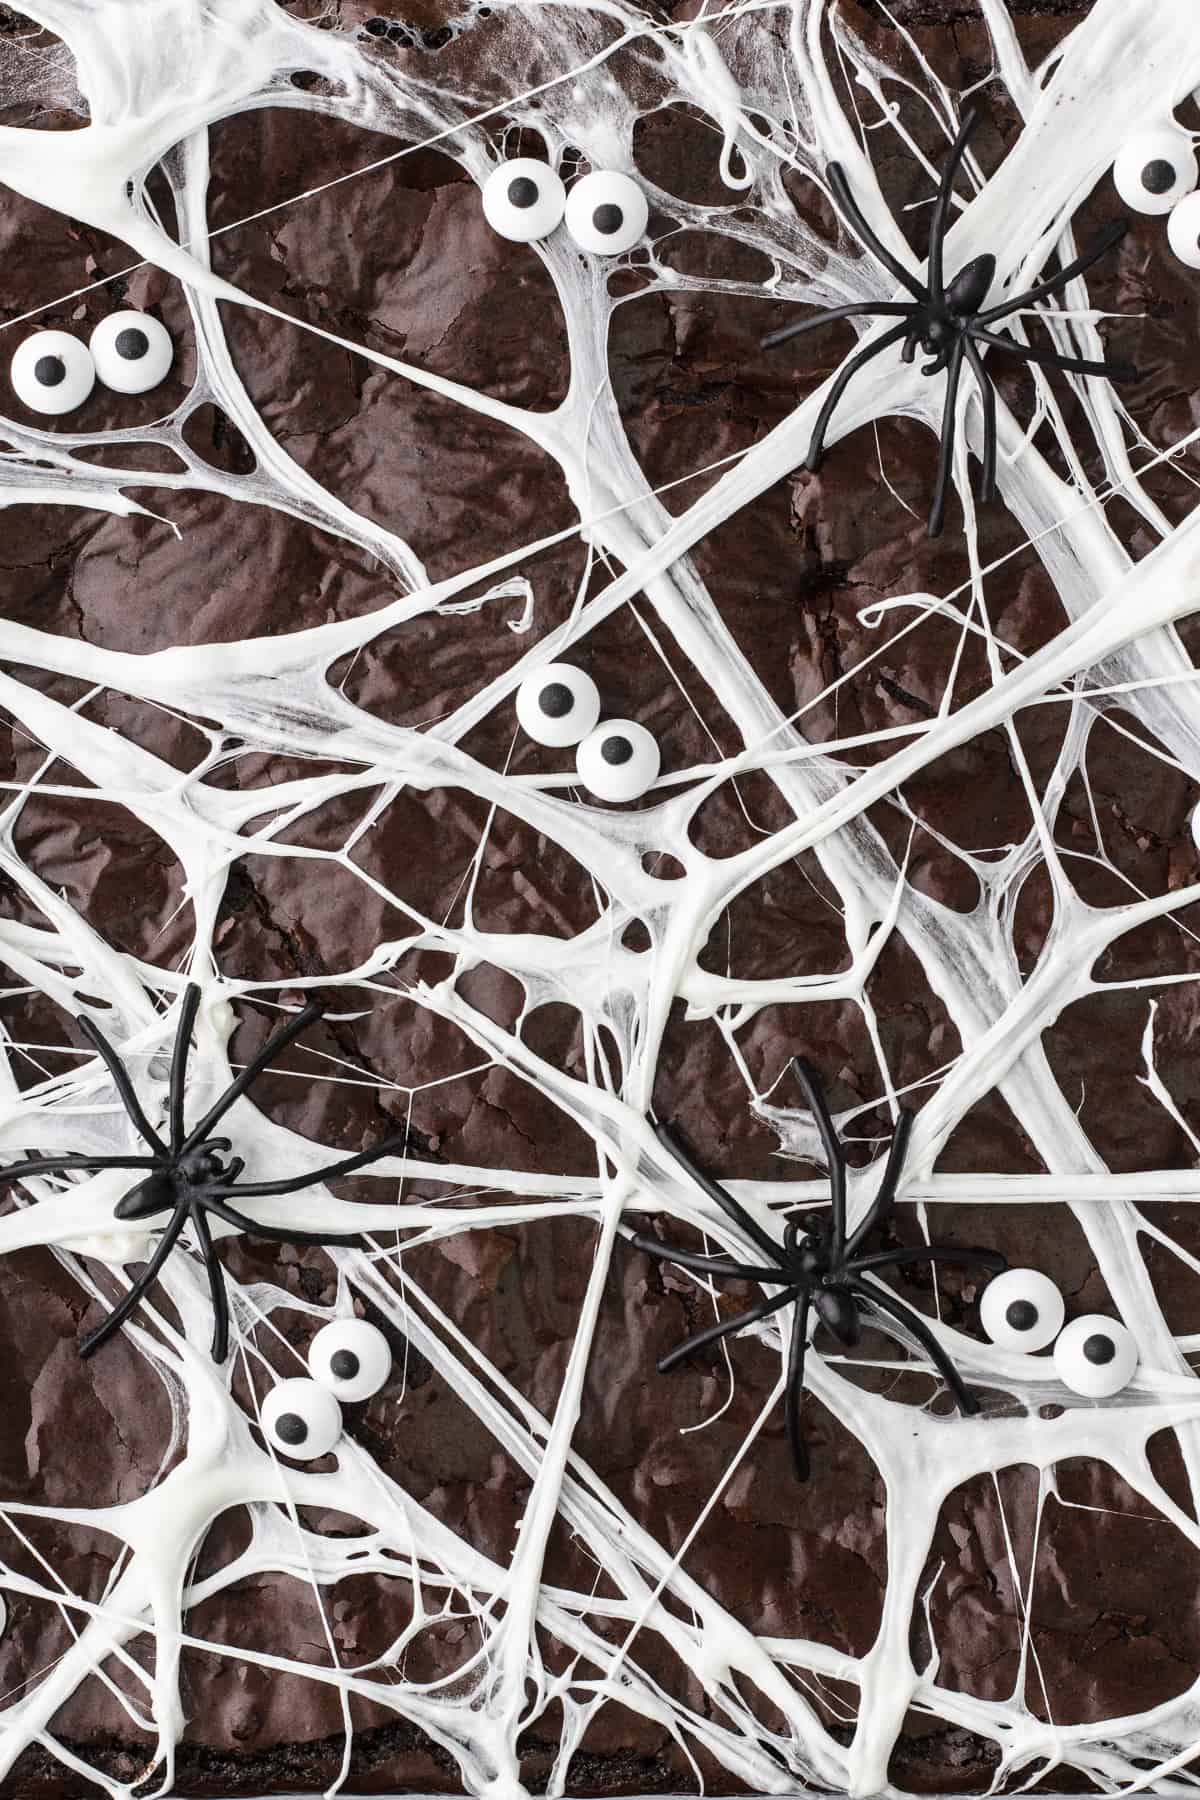 Close up spider web olive oil brownies